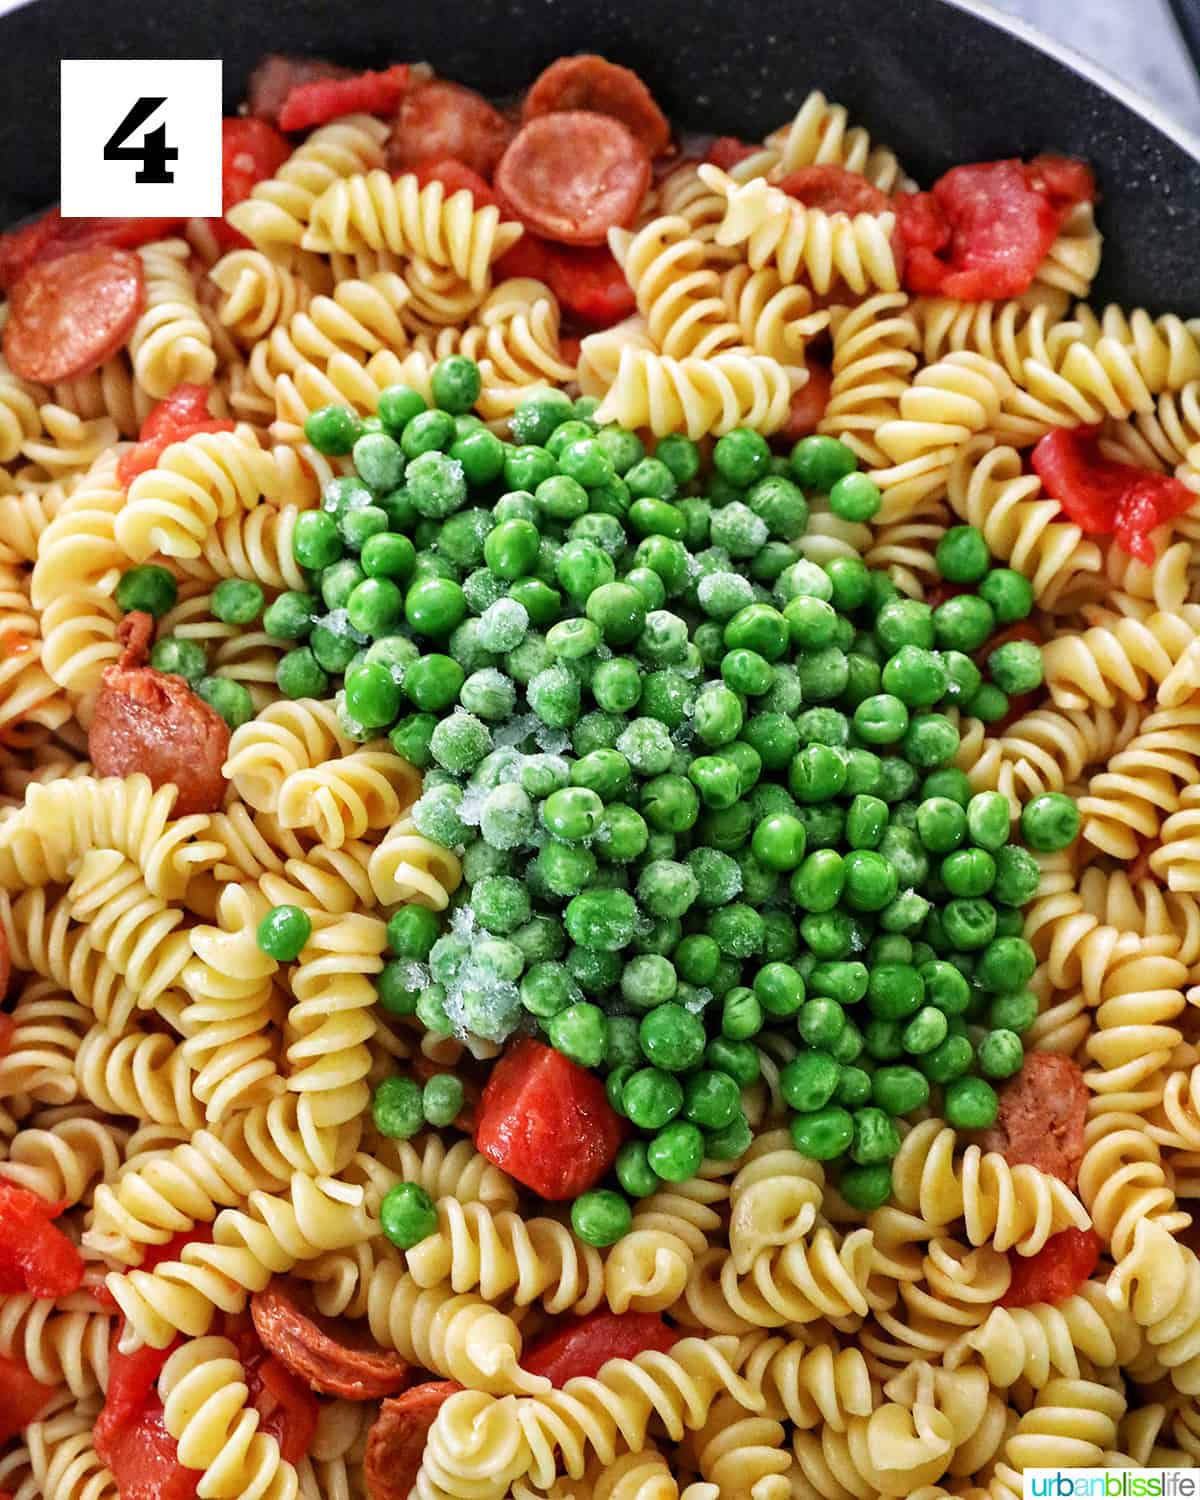 peas on top of pasta, tomatoes, and linguica in a skillet.